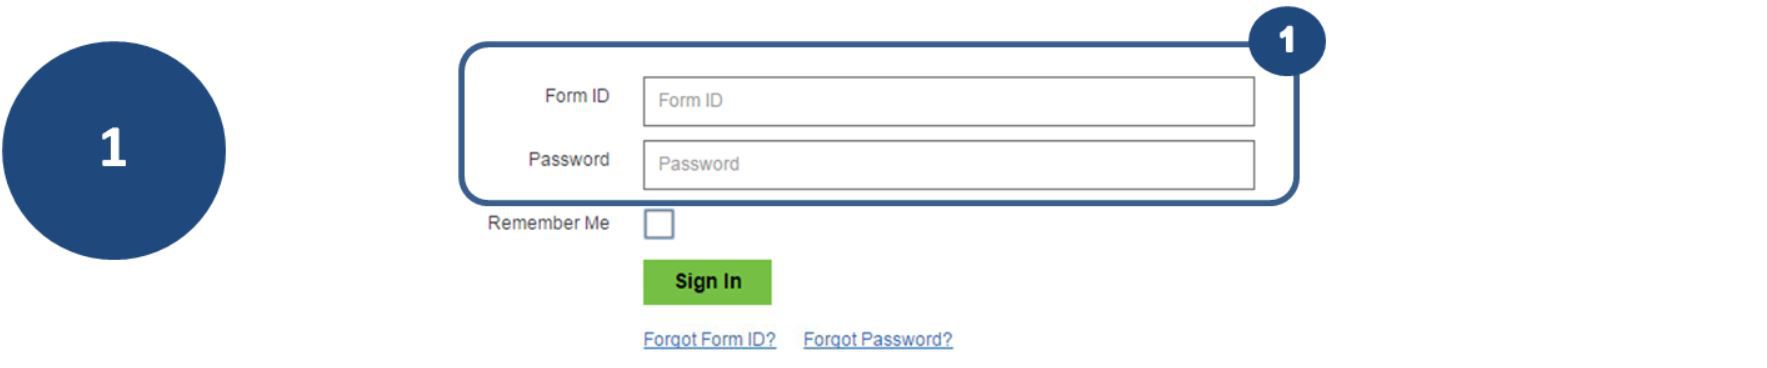 1. To view the status page, log in using your Form ID and Password.